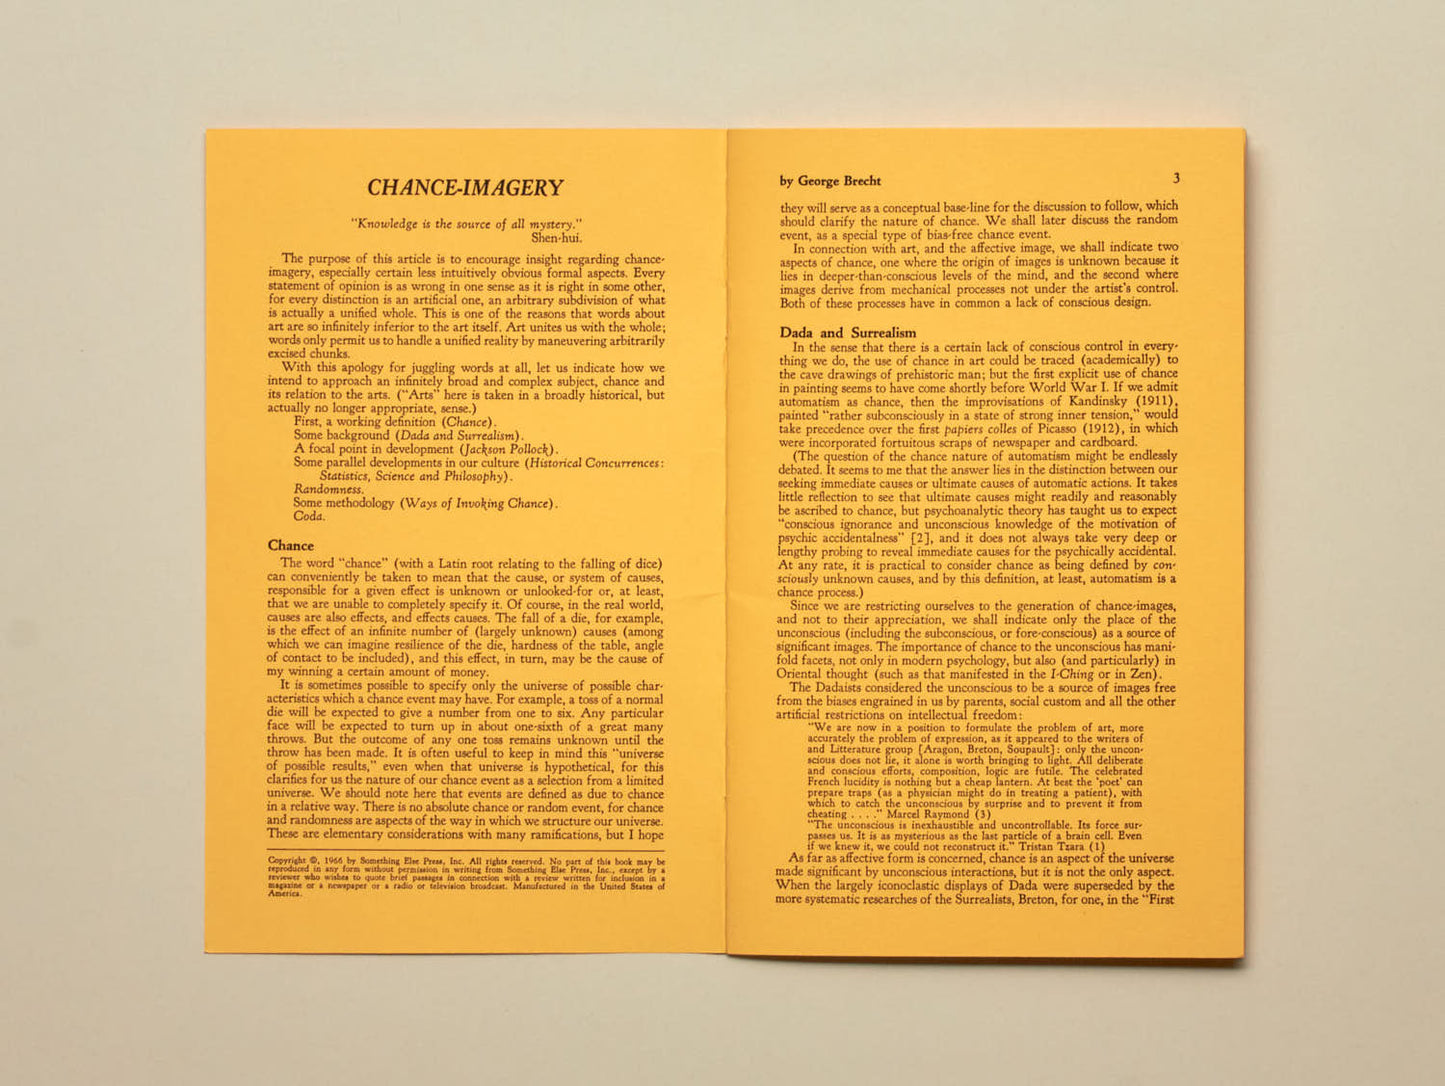 George Brecht, Great Bear Pamphlet Series: Chance-Imagery